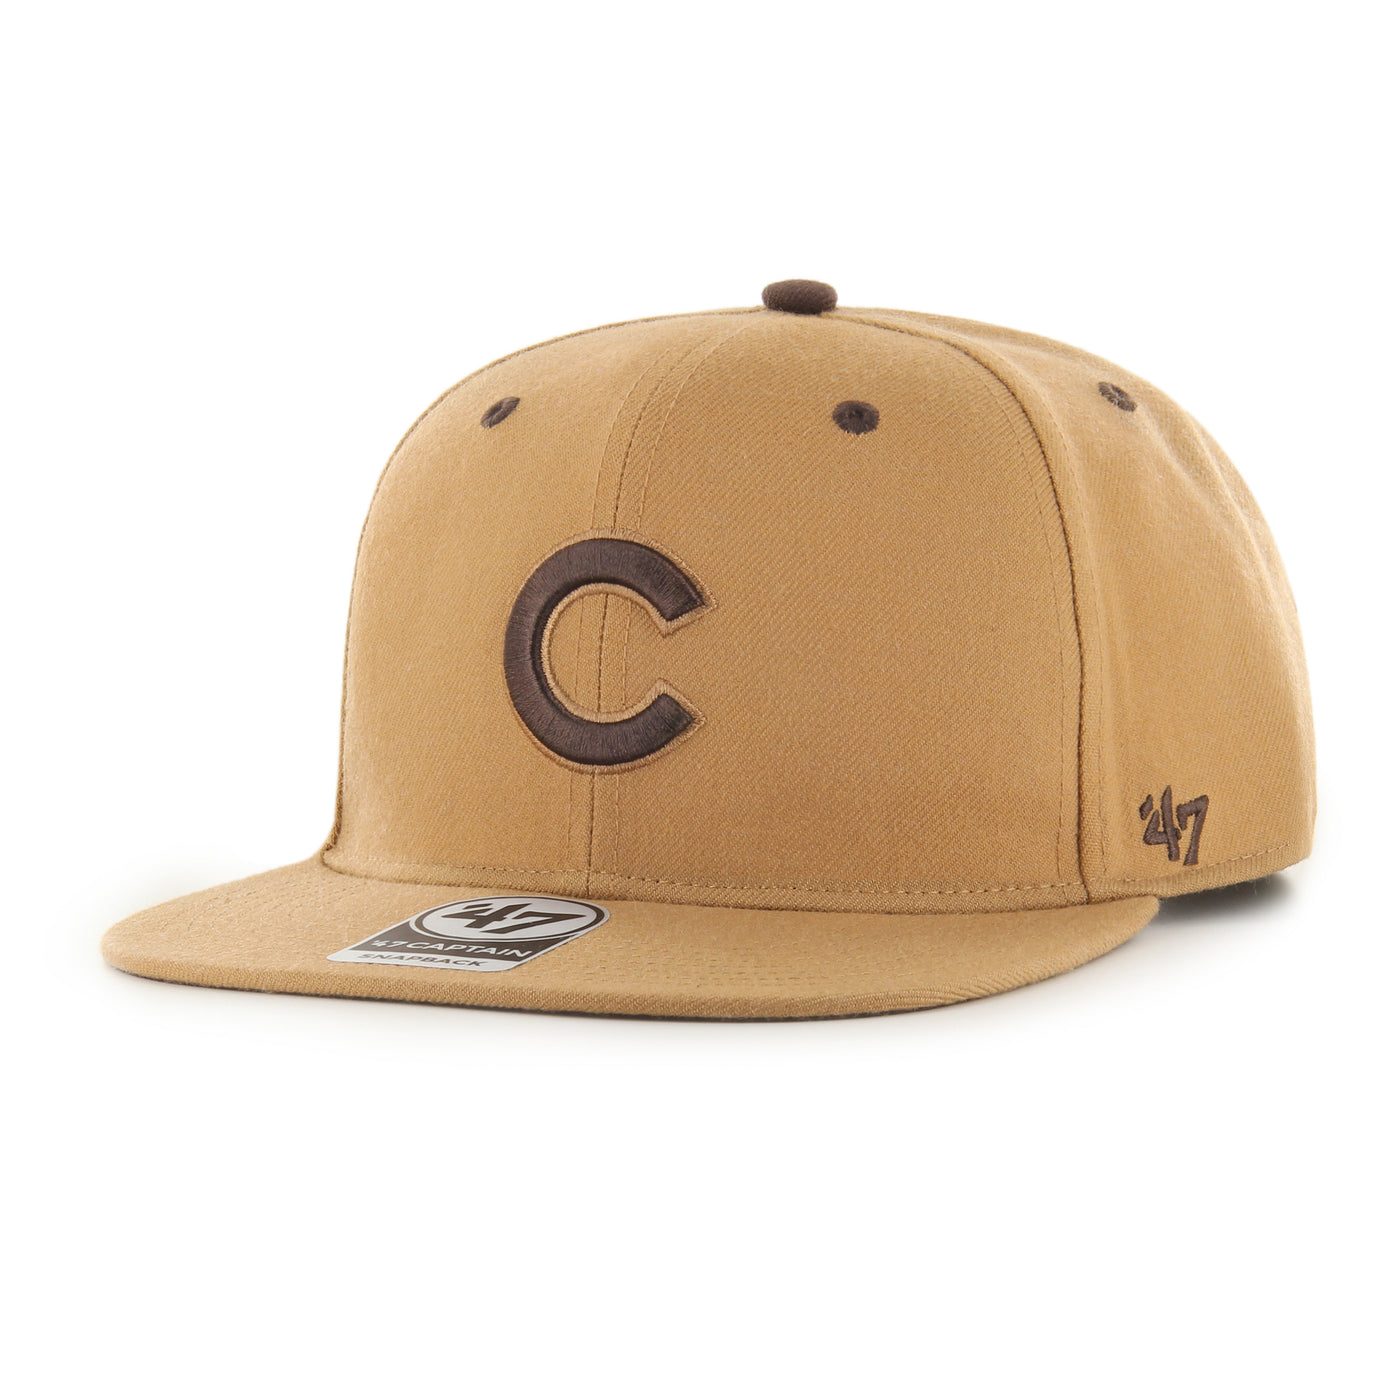 CHICAGO CUBS '47 C LOGO TOFFEE SNAPBACK CAP